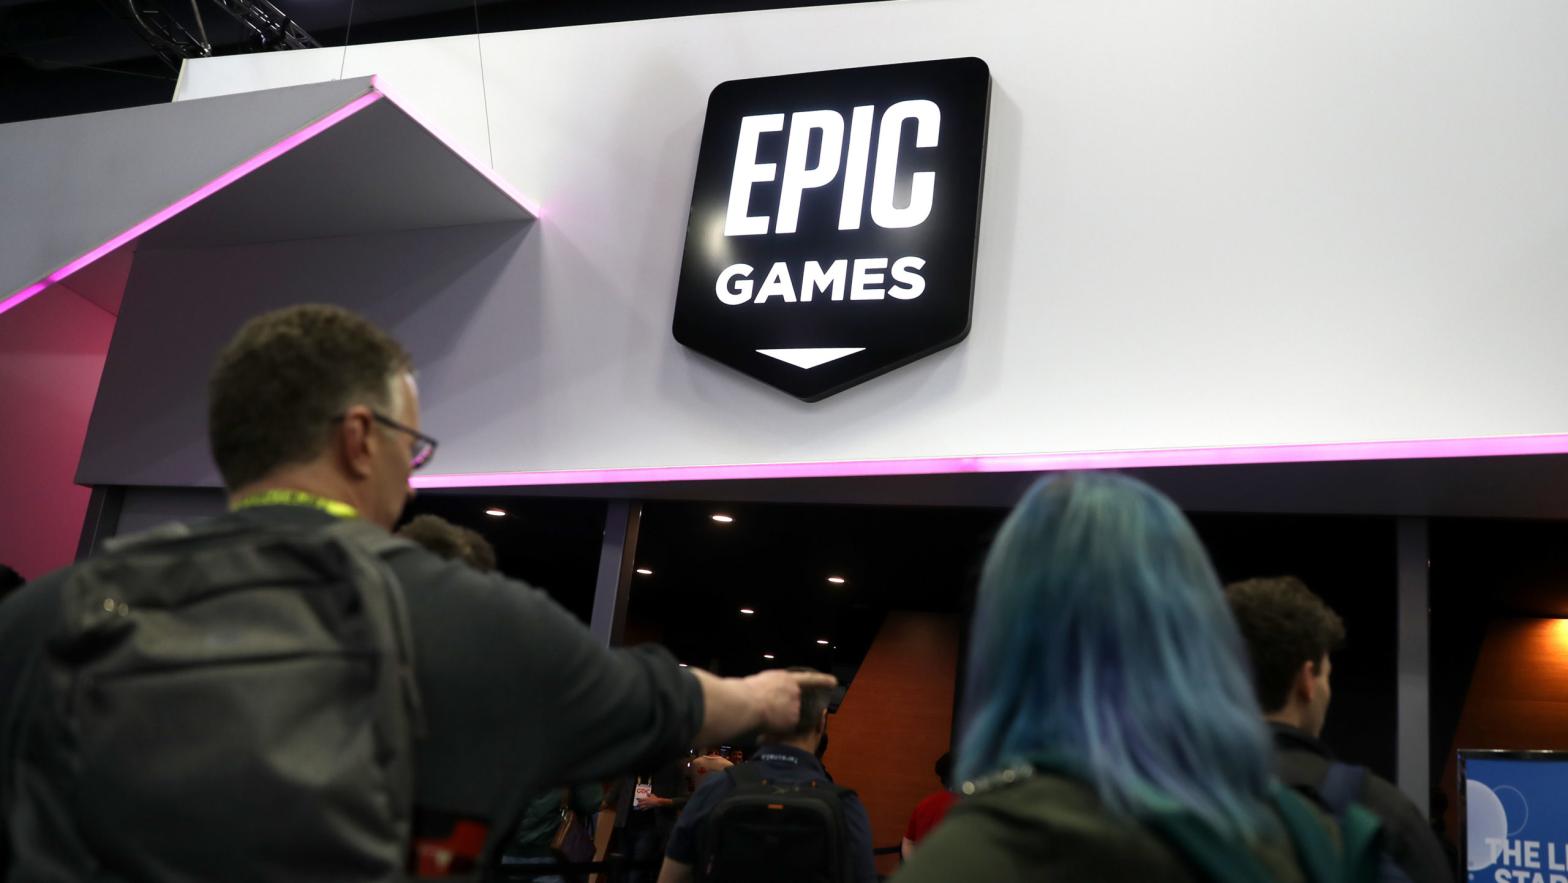 Attendees walk by the Epic Games booth at the 2019 GDC Game Developers Conference on March 20, 2019 in San Francisco, California. (Photo: Justin Sullivan, Getty Images)